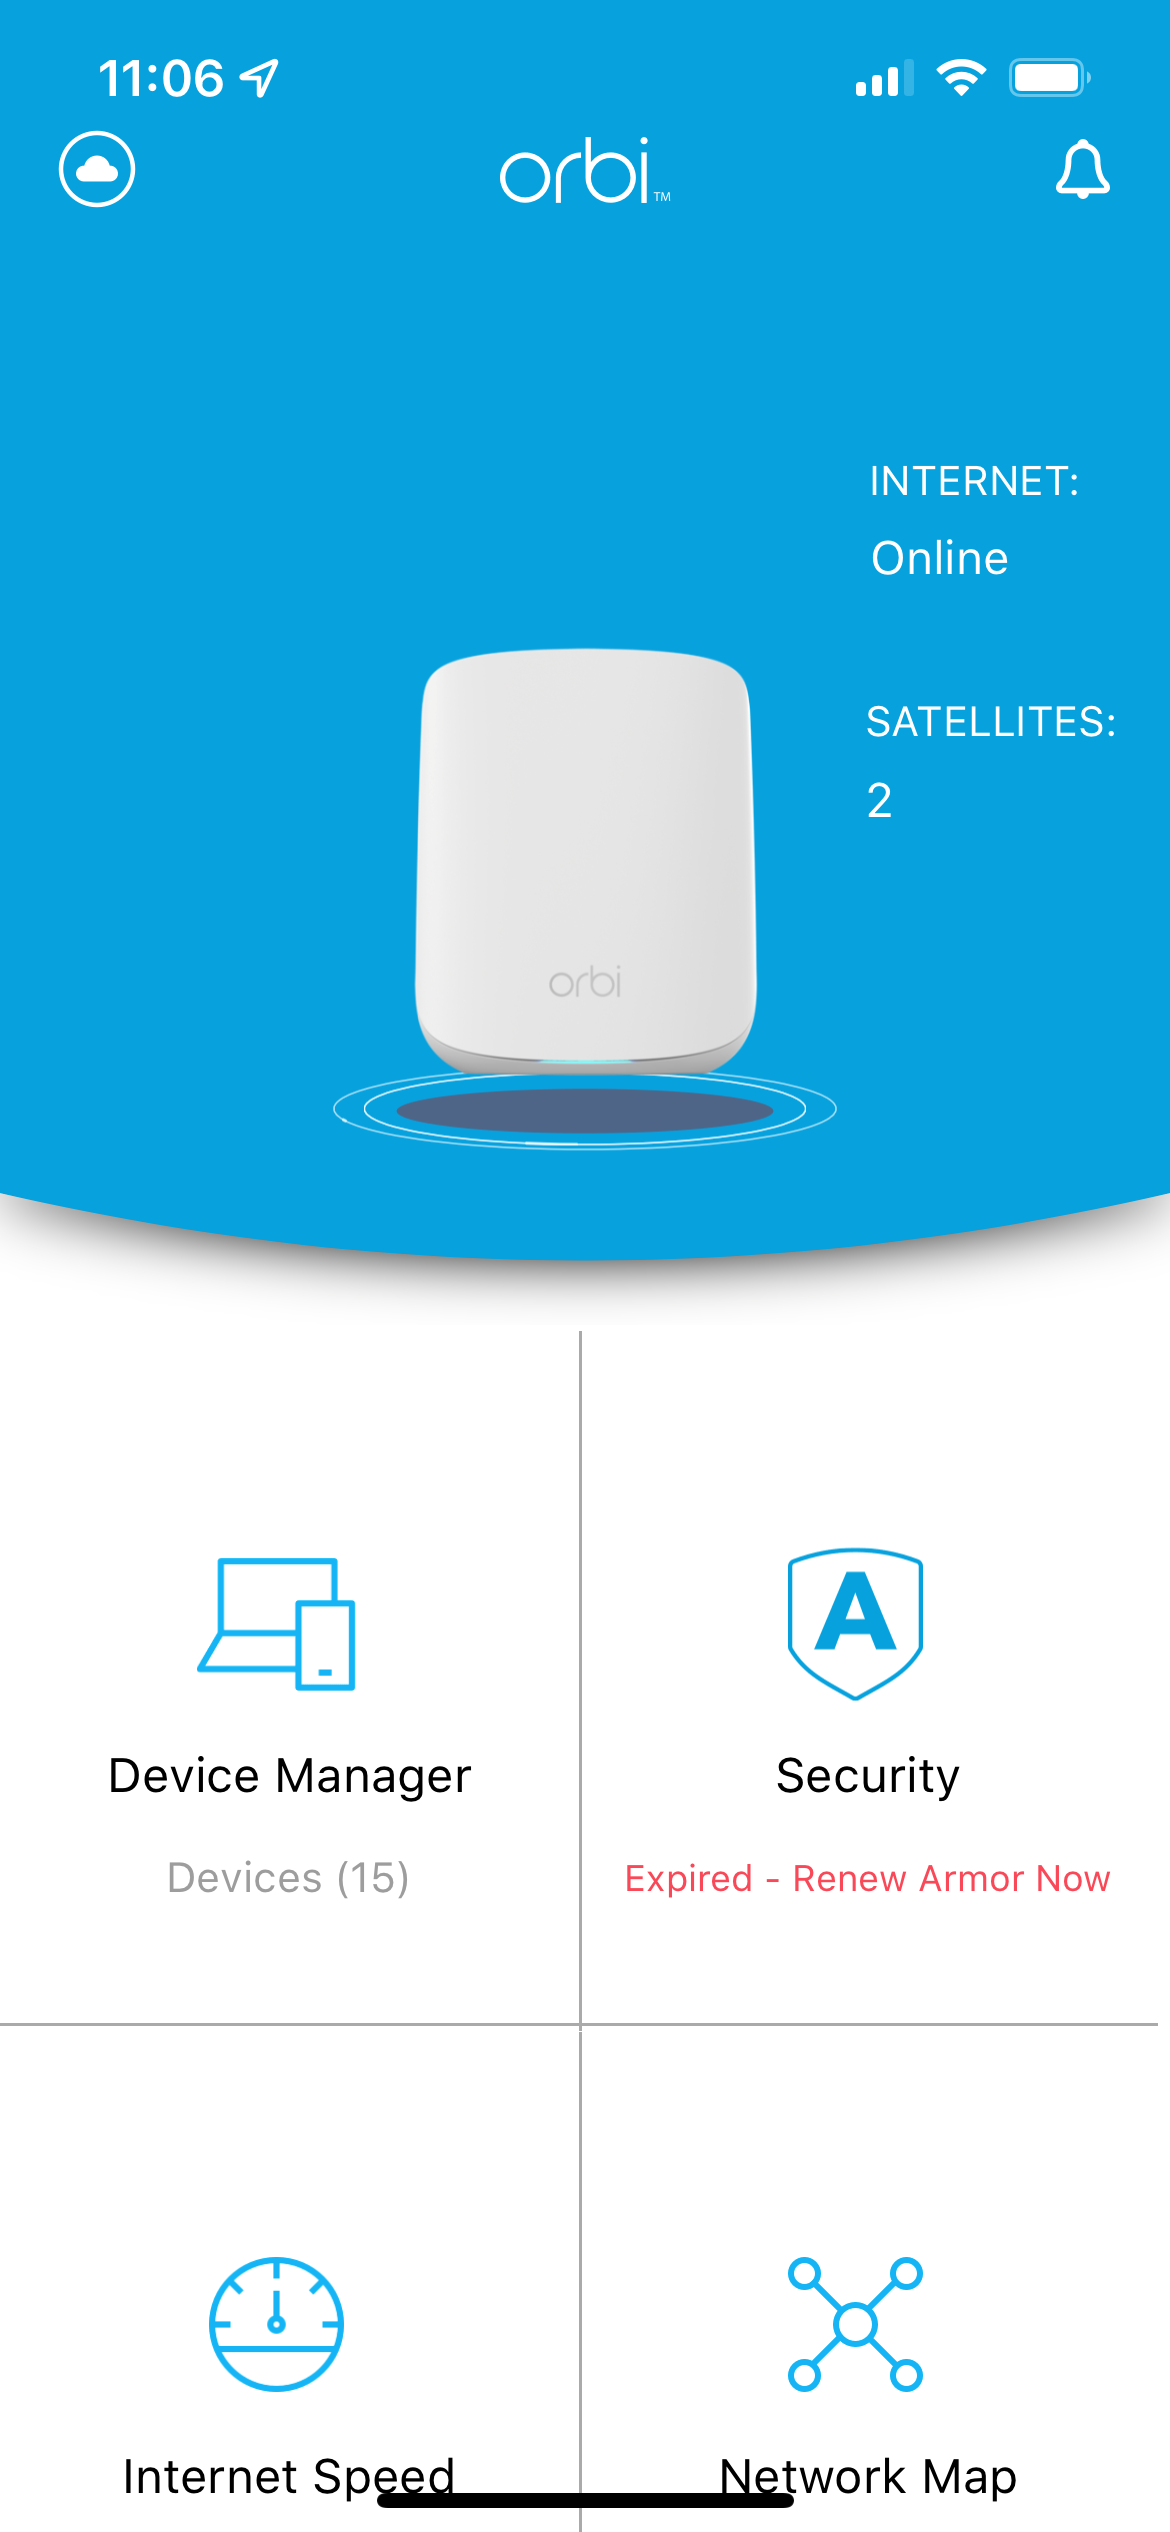 How to Set Up Orbi With the Orbi App